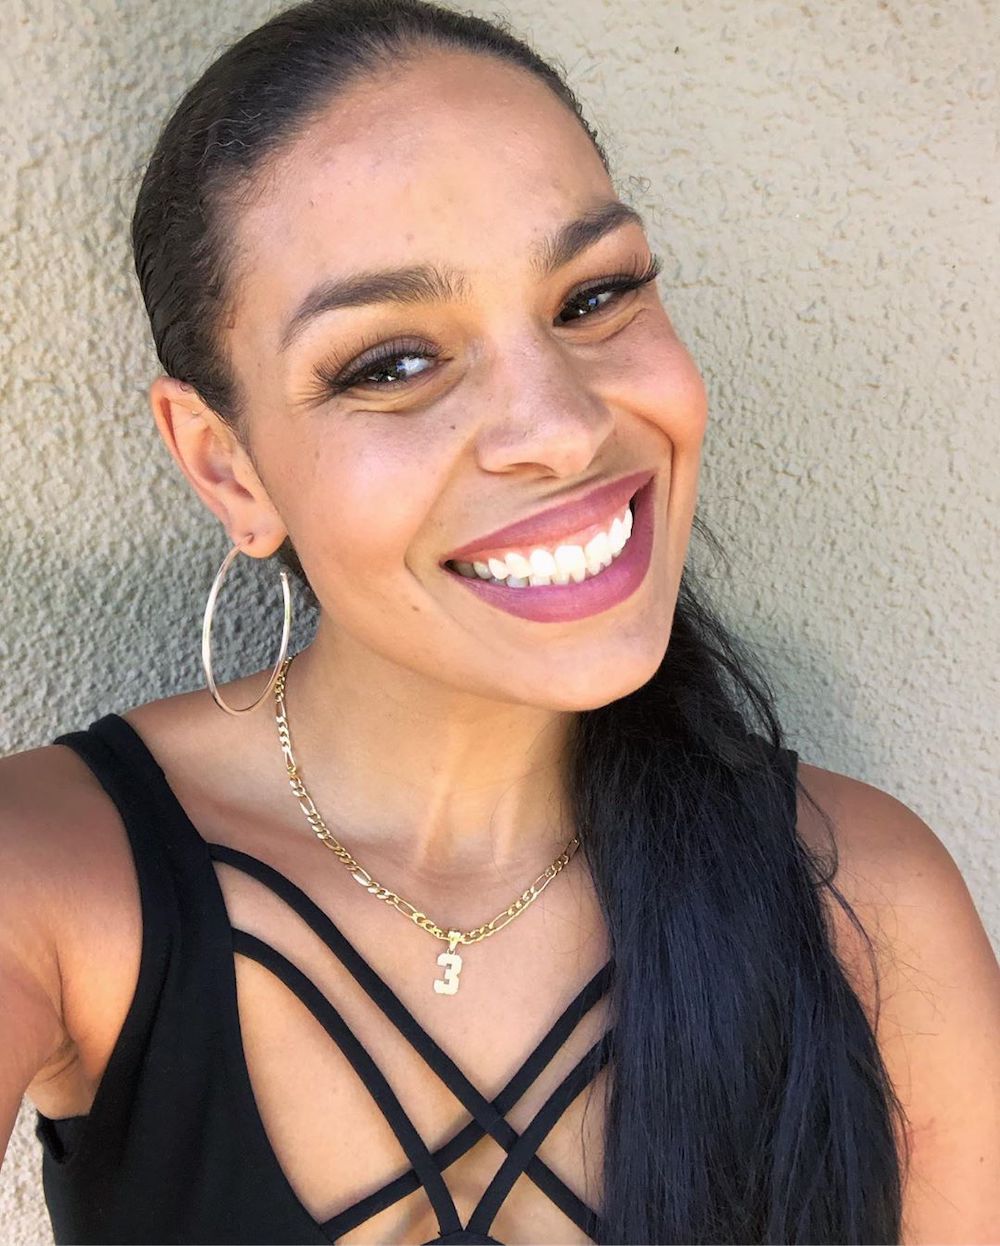 Jordin Sparks Releases Her First Solo Music in Almost Five Years